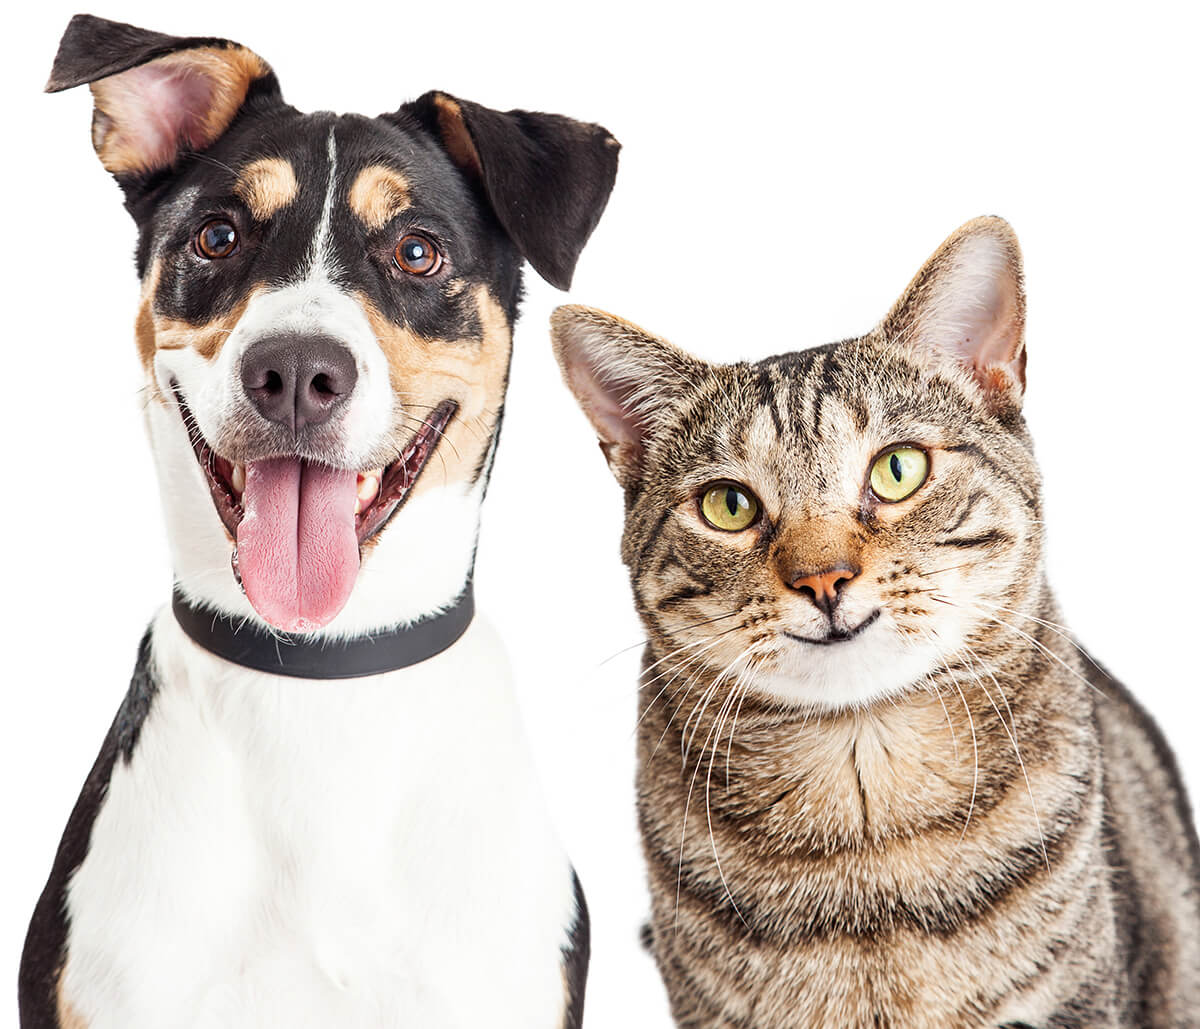 US FDA Grain-Free Diet Study is showing an increased risk for heart conditions in our pets.